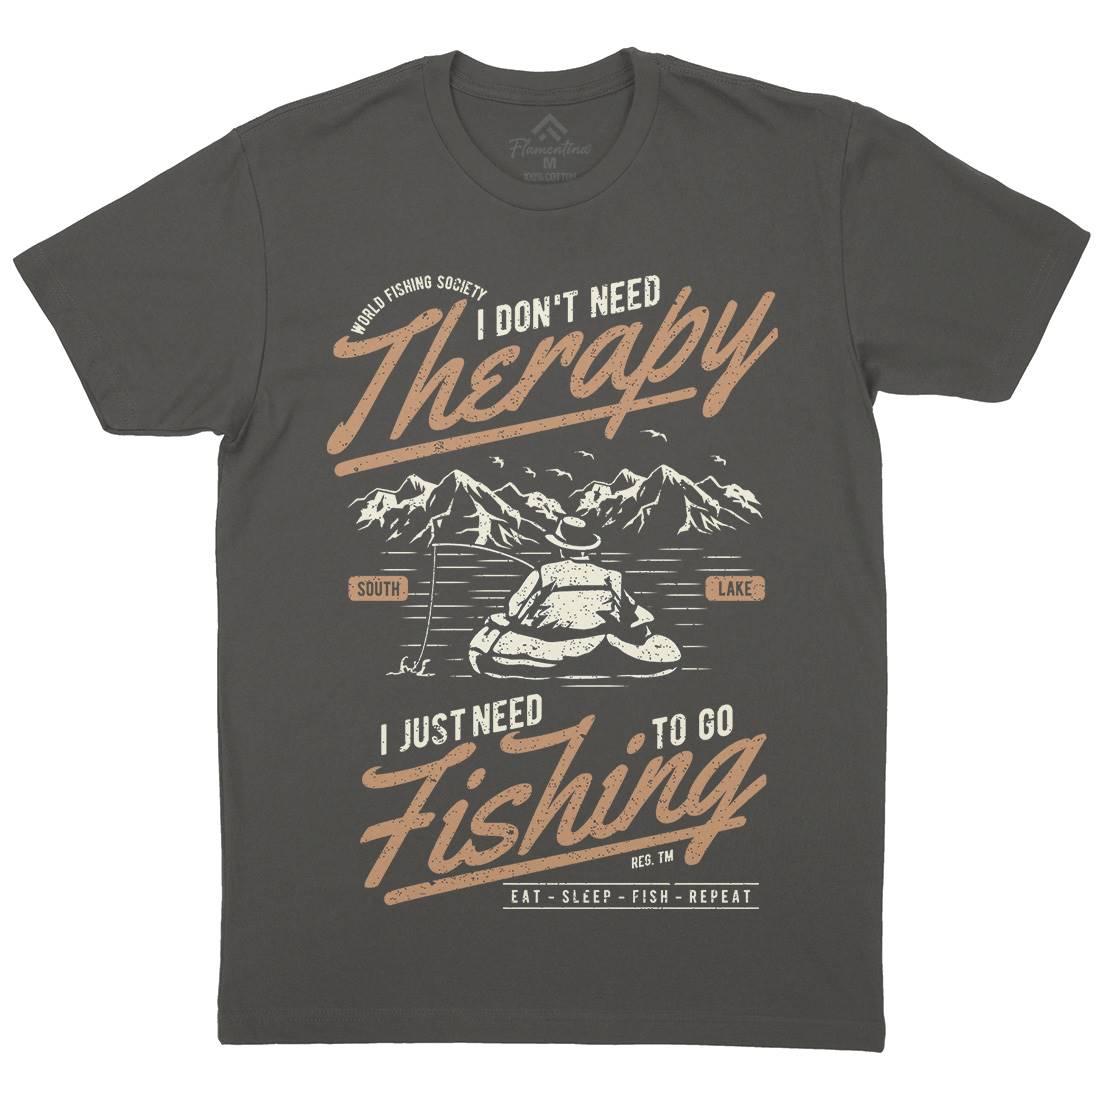 Therapy Mens Crew Neck T-Shirt Fishing A662